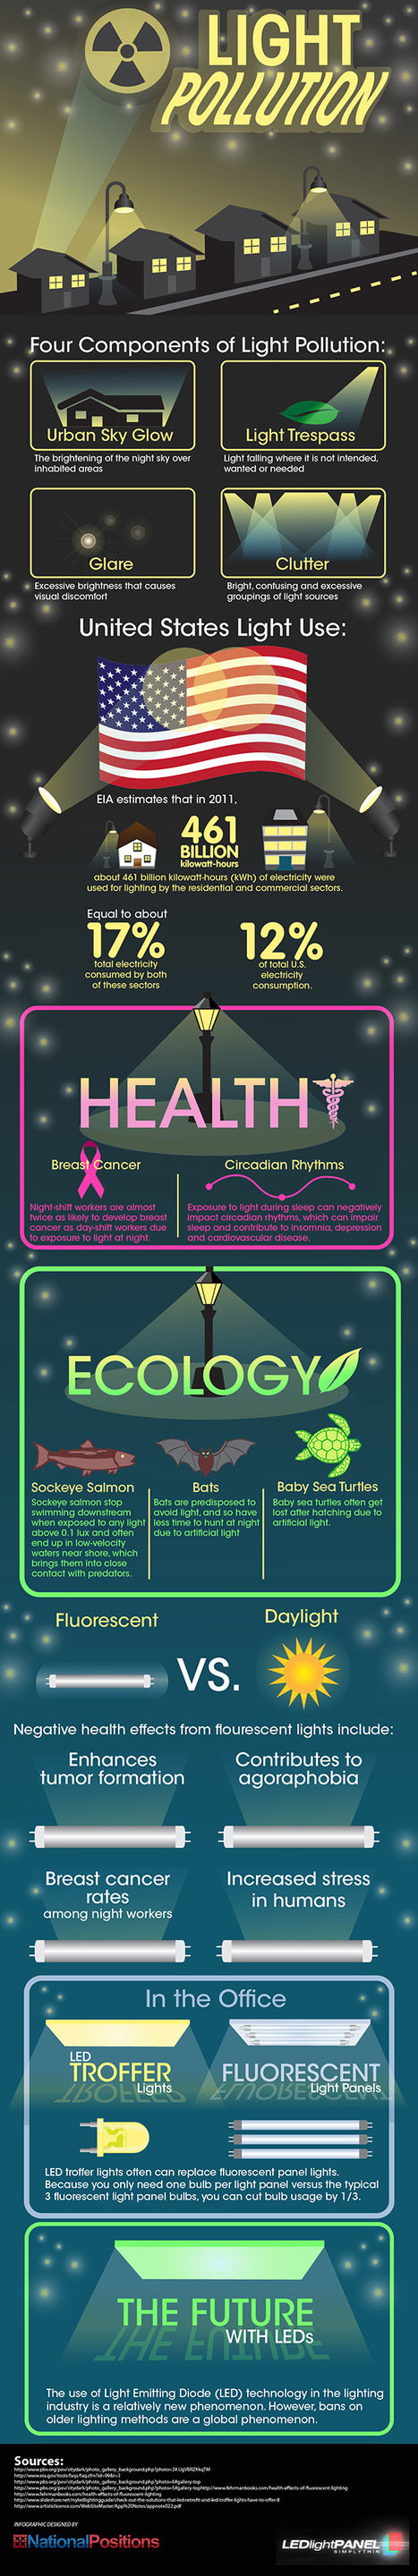 Infographic: What is Light Pollution? | Sustainability Science | Scoop.it